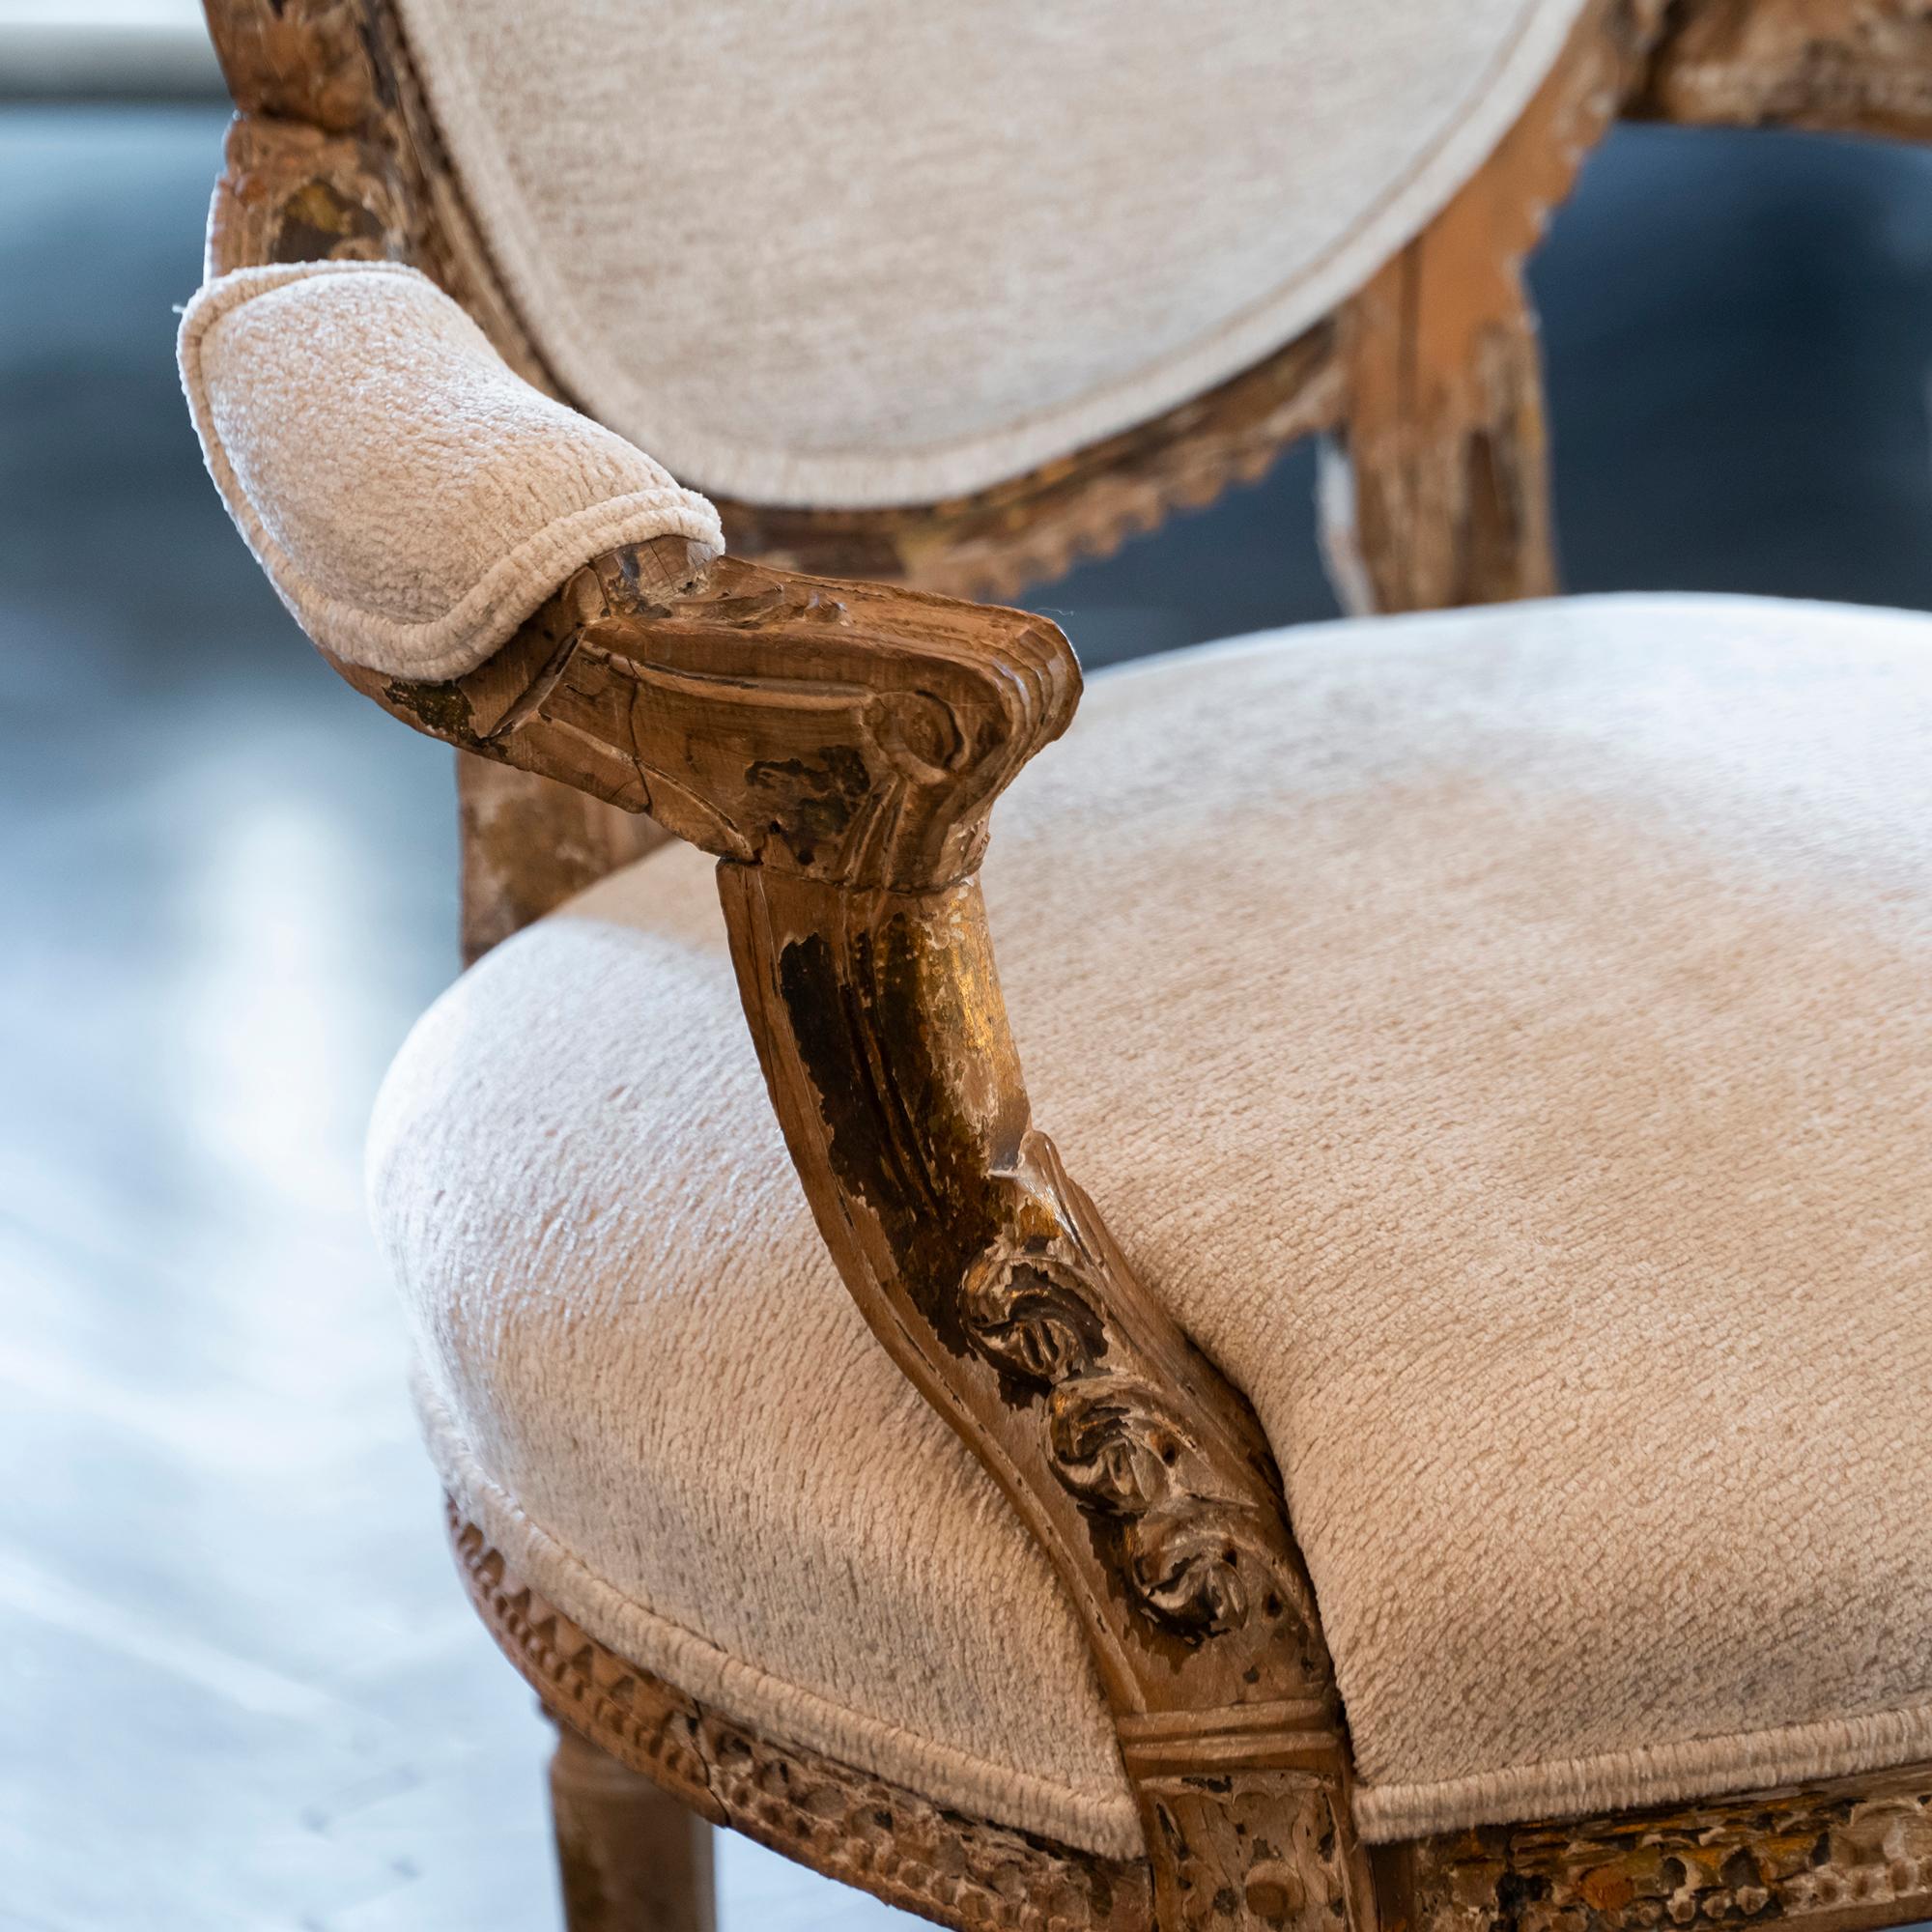 Early 20th century French carved wood armchair in perfect condition and vintage patina, newly reupholstered in ivory velvet.